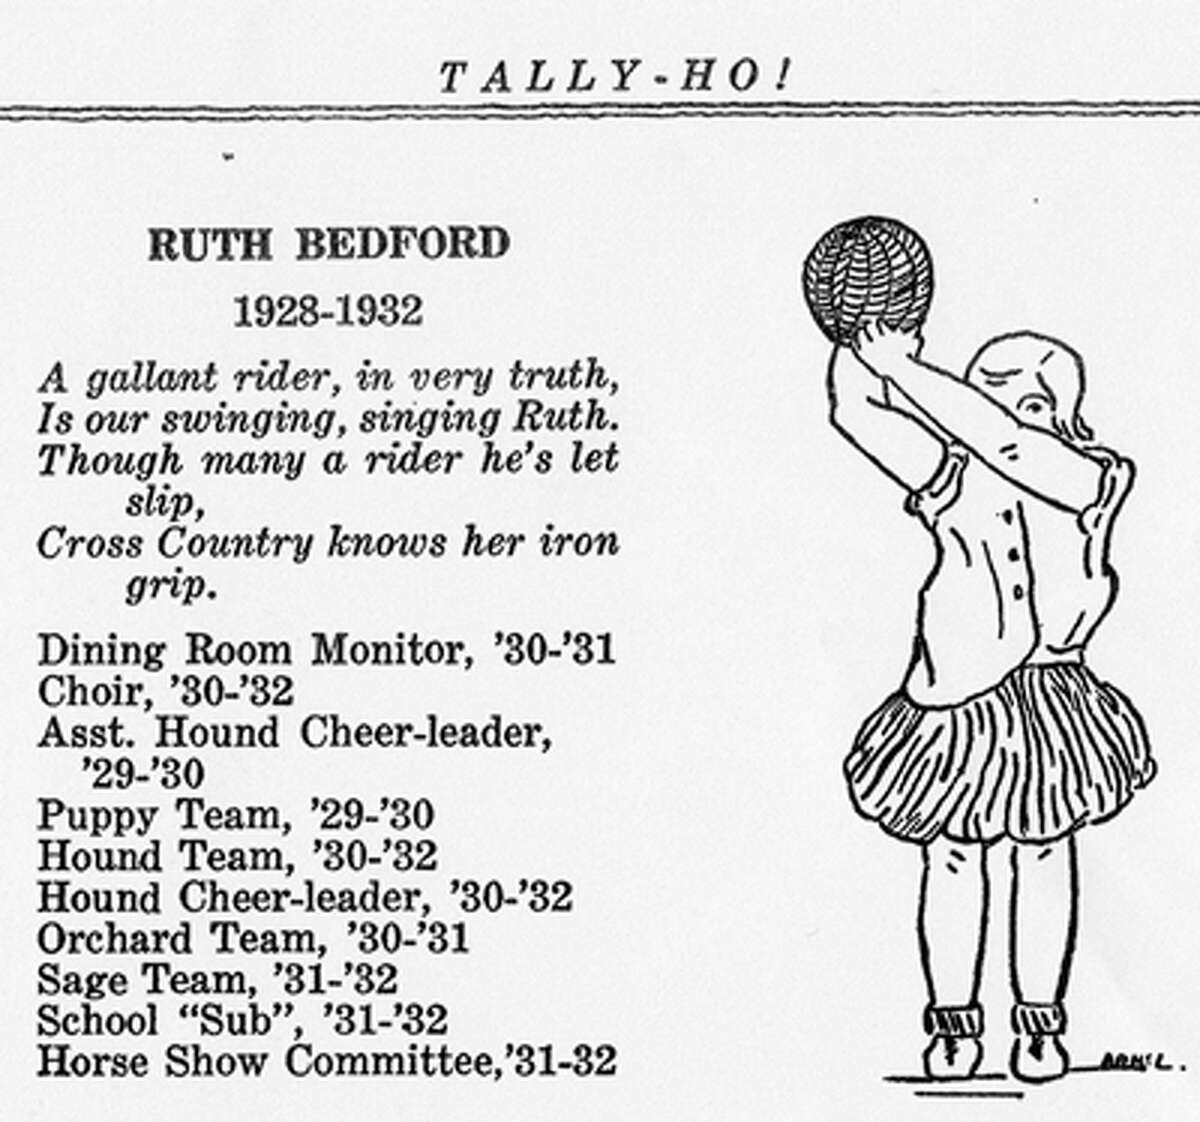 Tally-Ho! is the name of the Foxcroft School yearbook and has been since 1914. This particular page, about Ruth Bedford, is from the 1932 Tally-Ho!